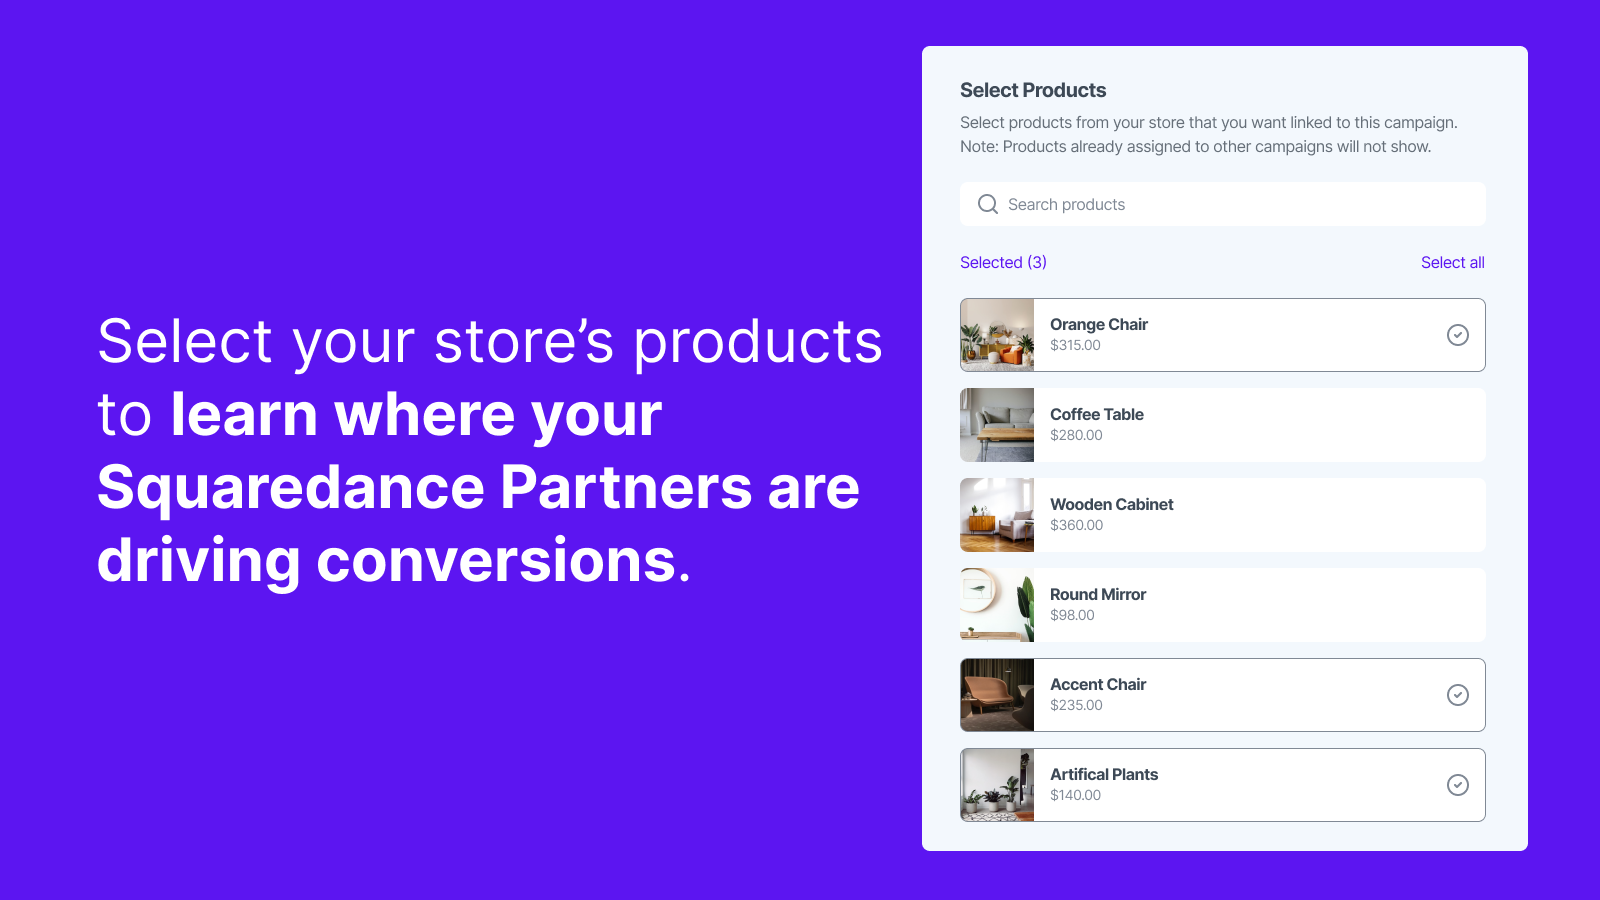 Select your store's products to learn about conversion sources